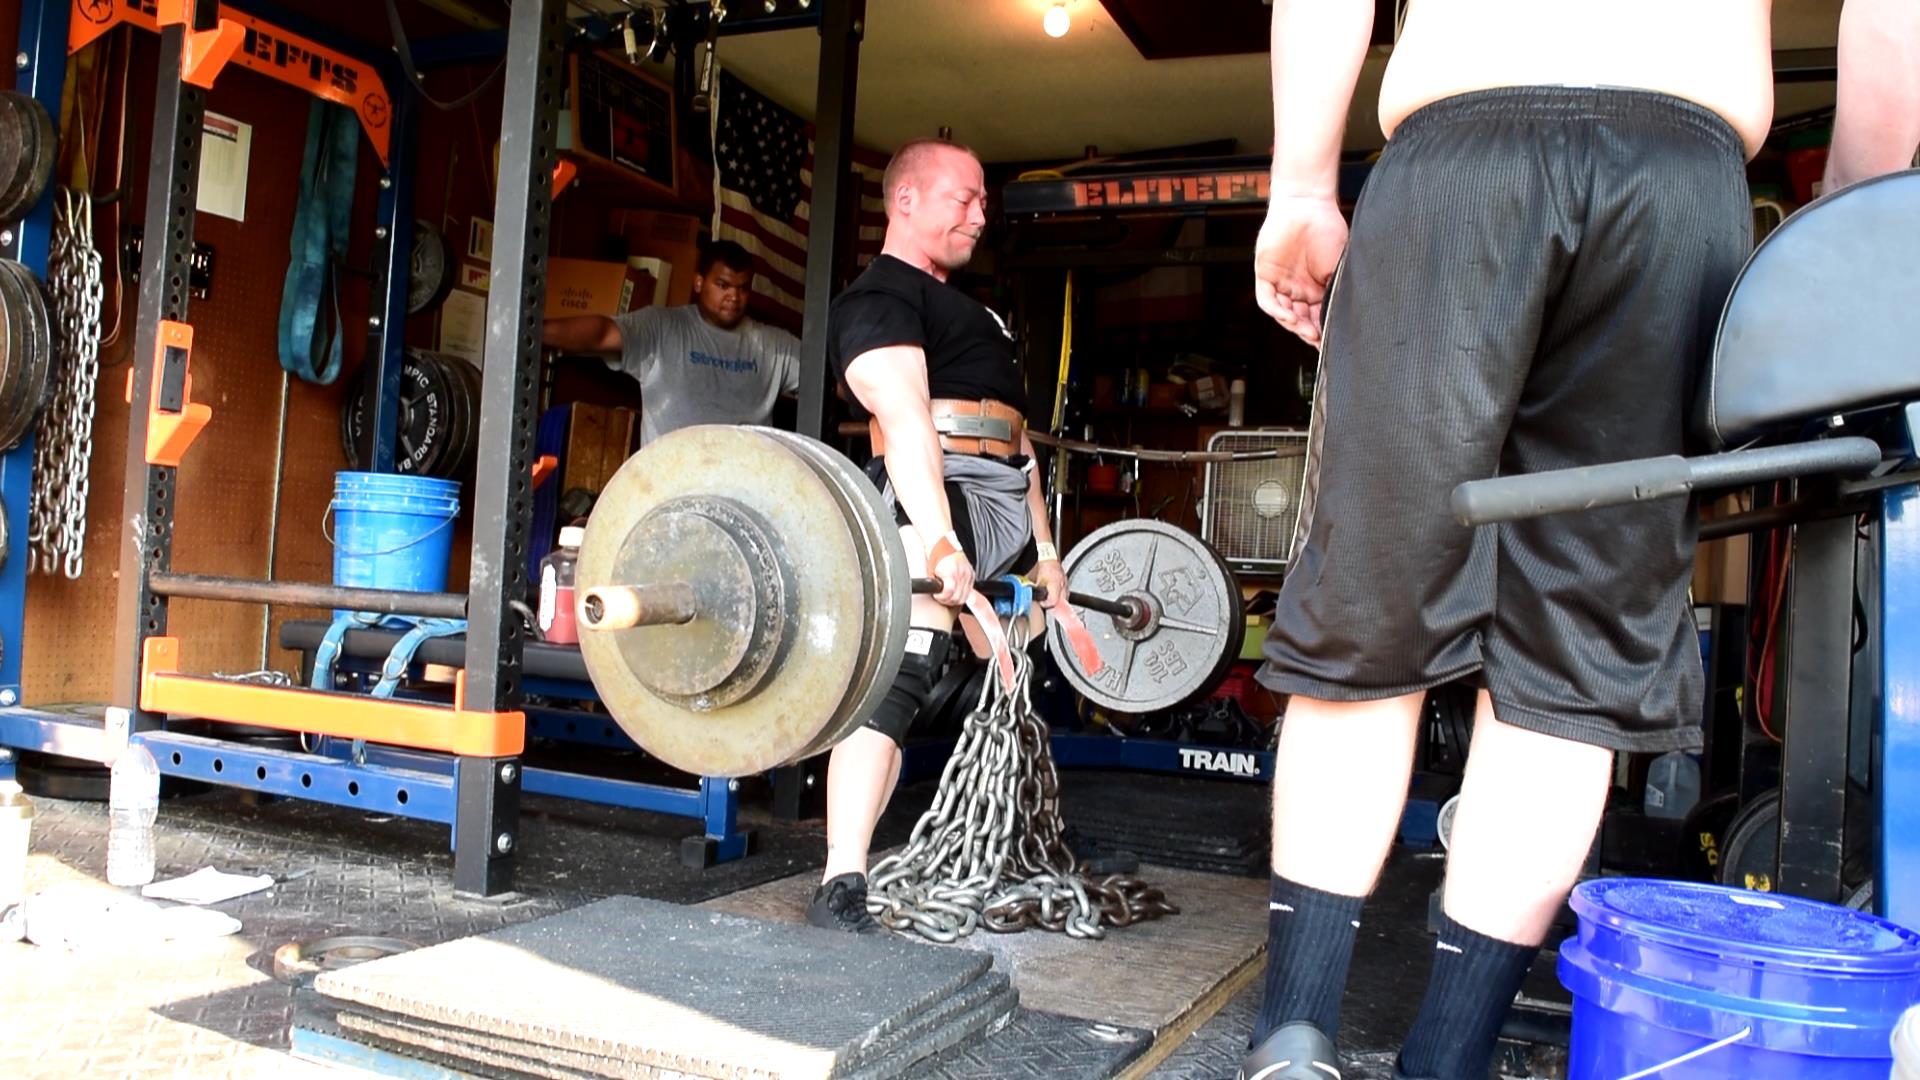 Max Effort Lower: Continued Squat and Deadlift Work